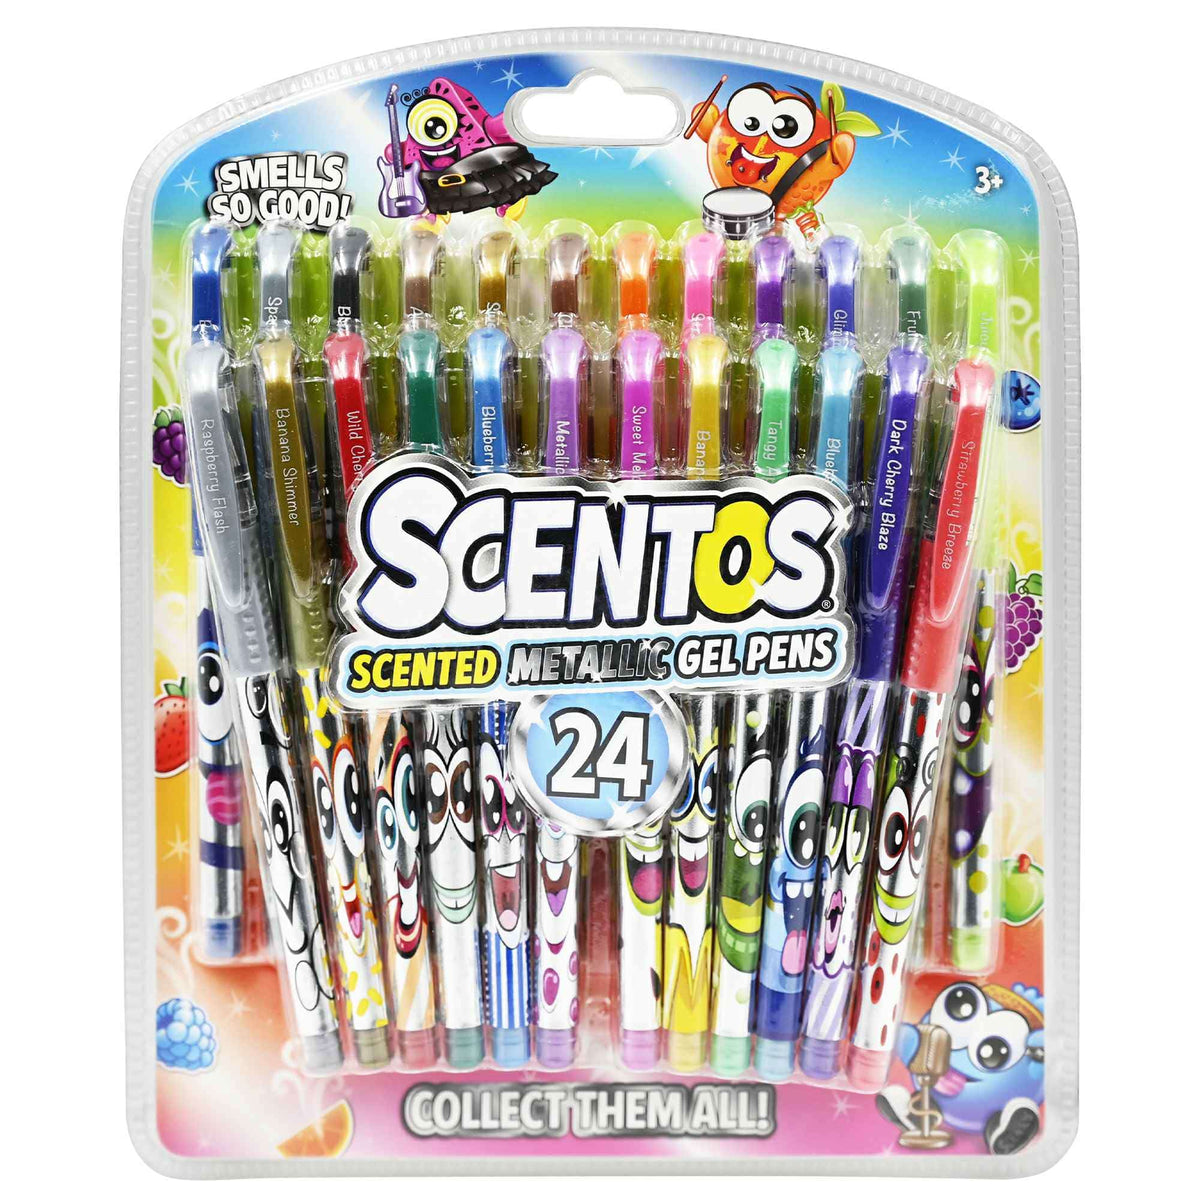 Scentos Scented Gel Pens 20 Count Pack